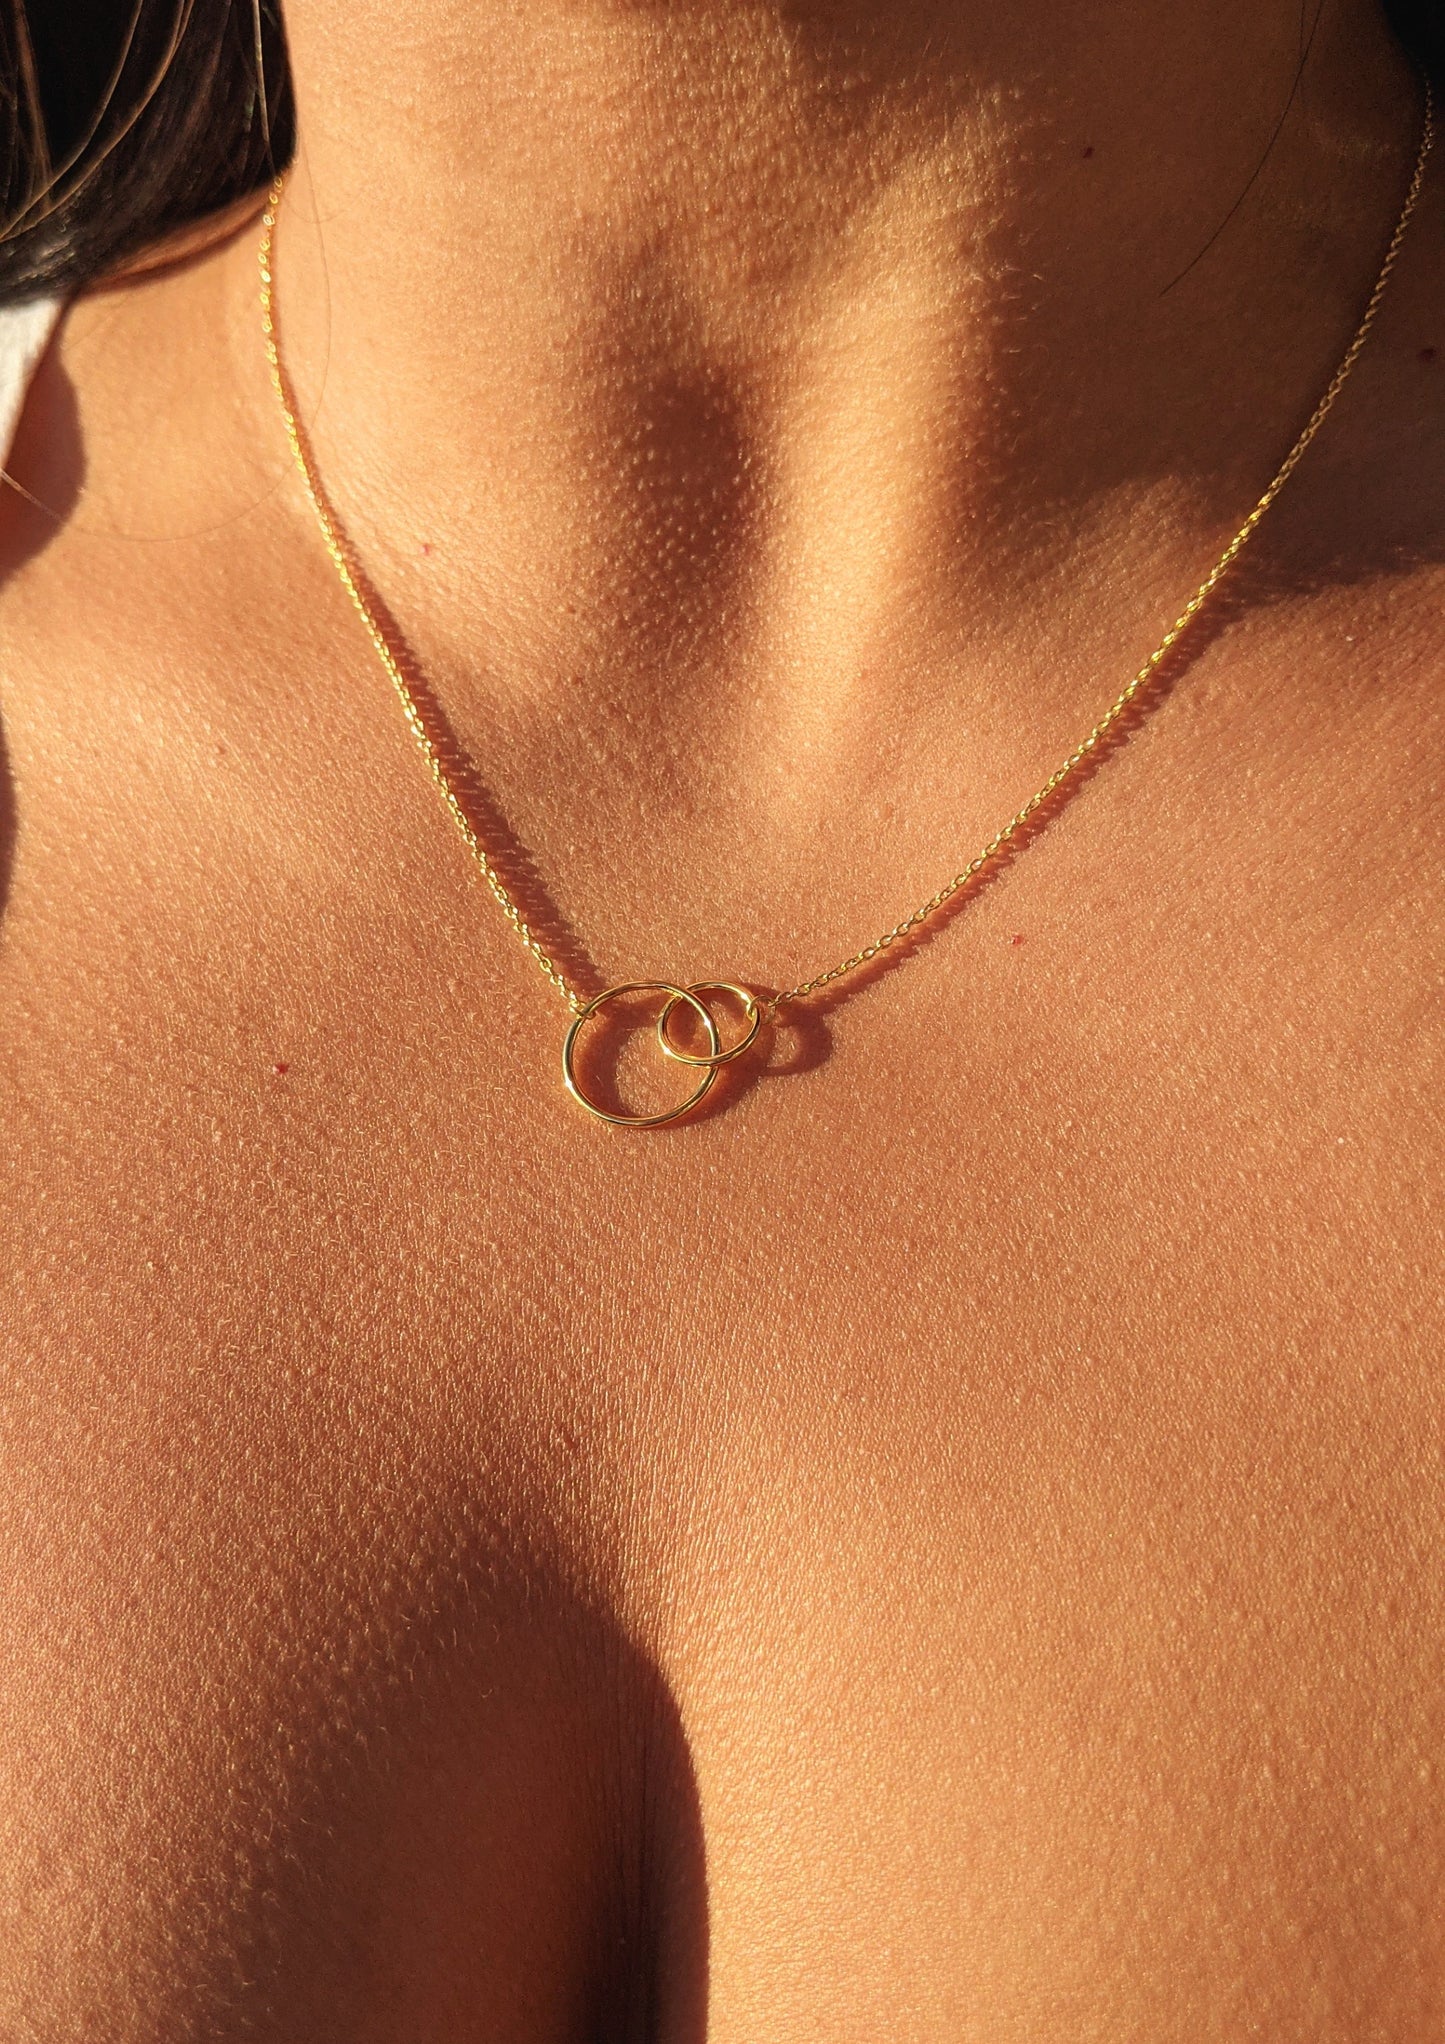 Chisolm Vermeil Infinity Necklace